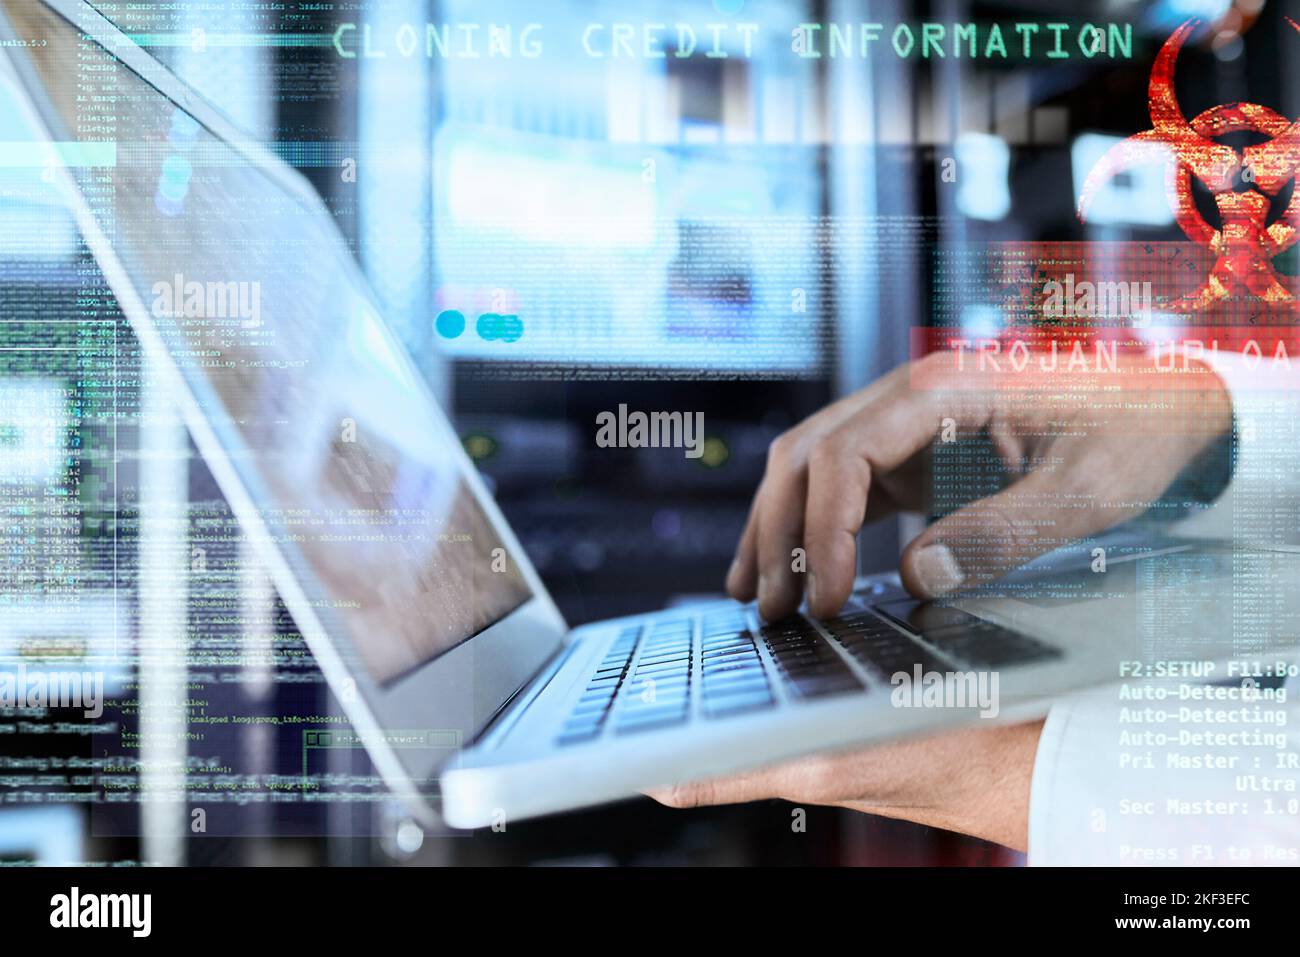 Hacker, laptop and hands with credit card information typing data with digital cybersecurity overlay for information technology. Hacking, cyberpunk Stock Photo